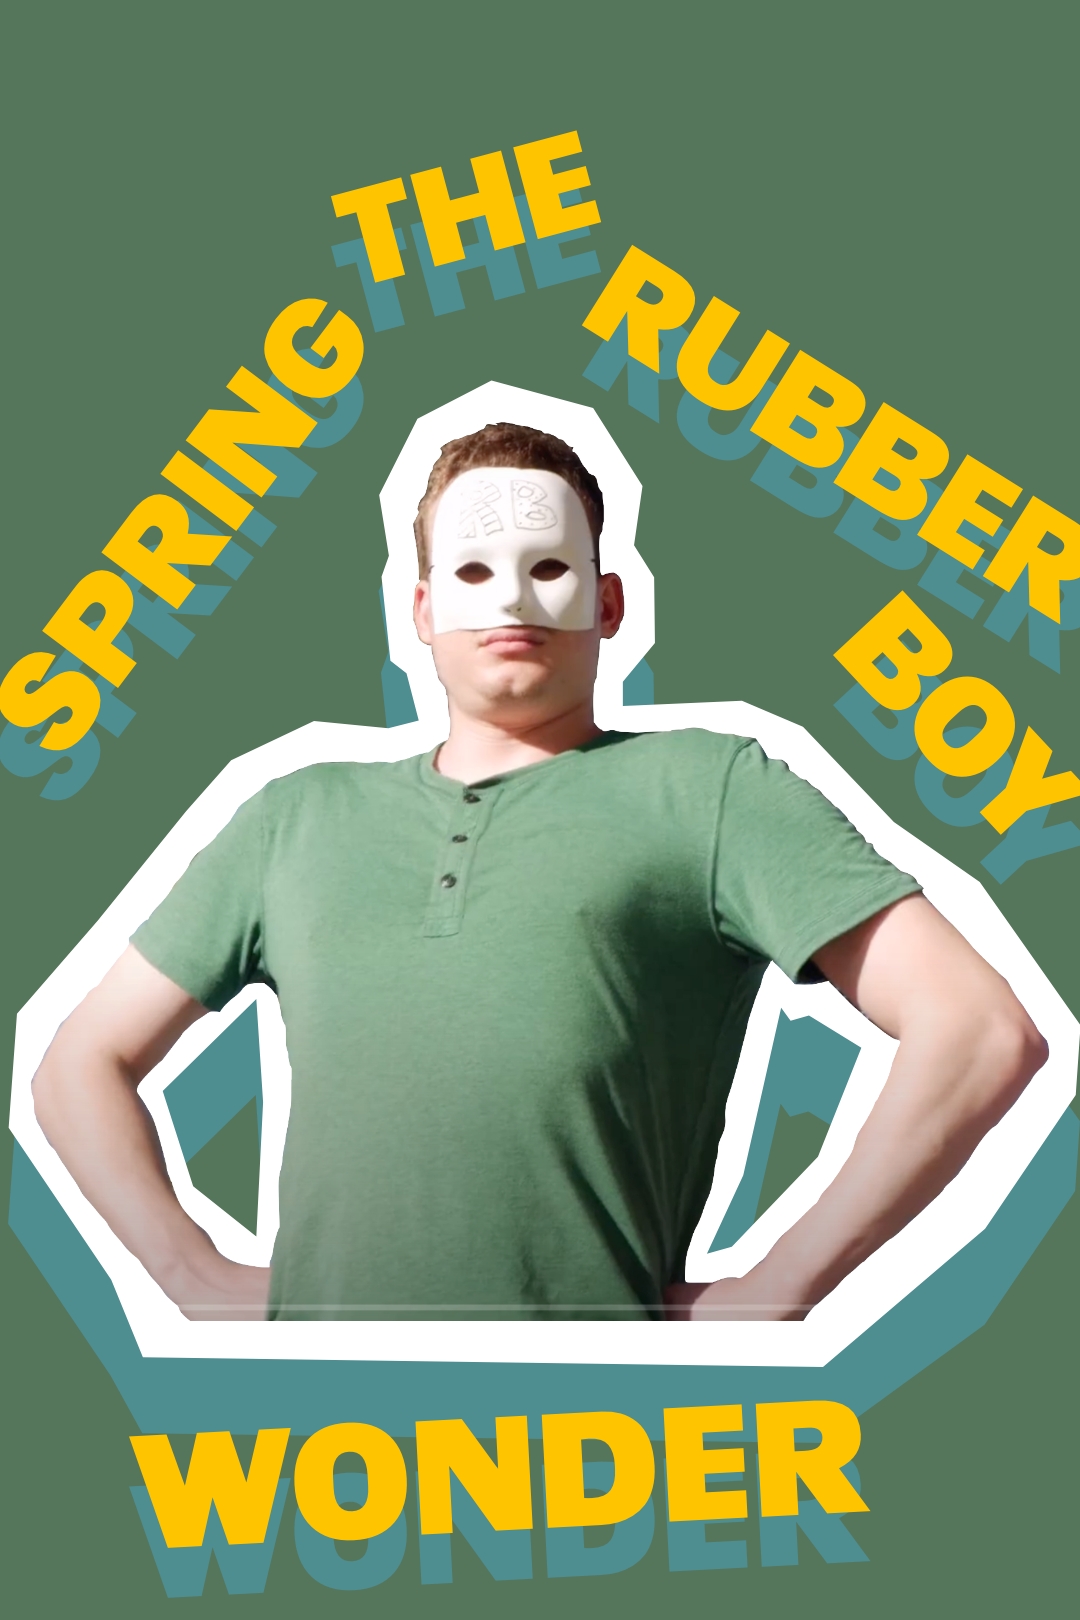 Poster for the film "Spring the Rubber Boy Wonder"